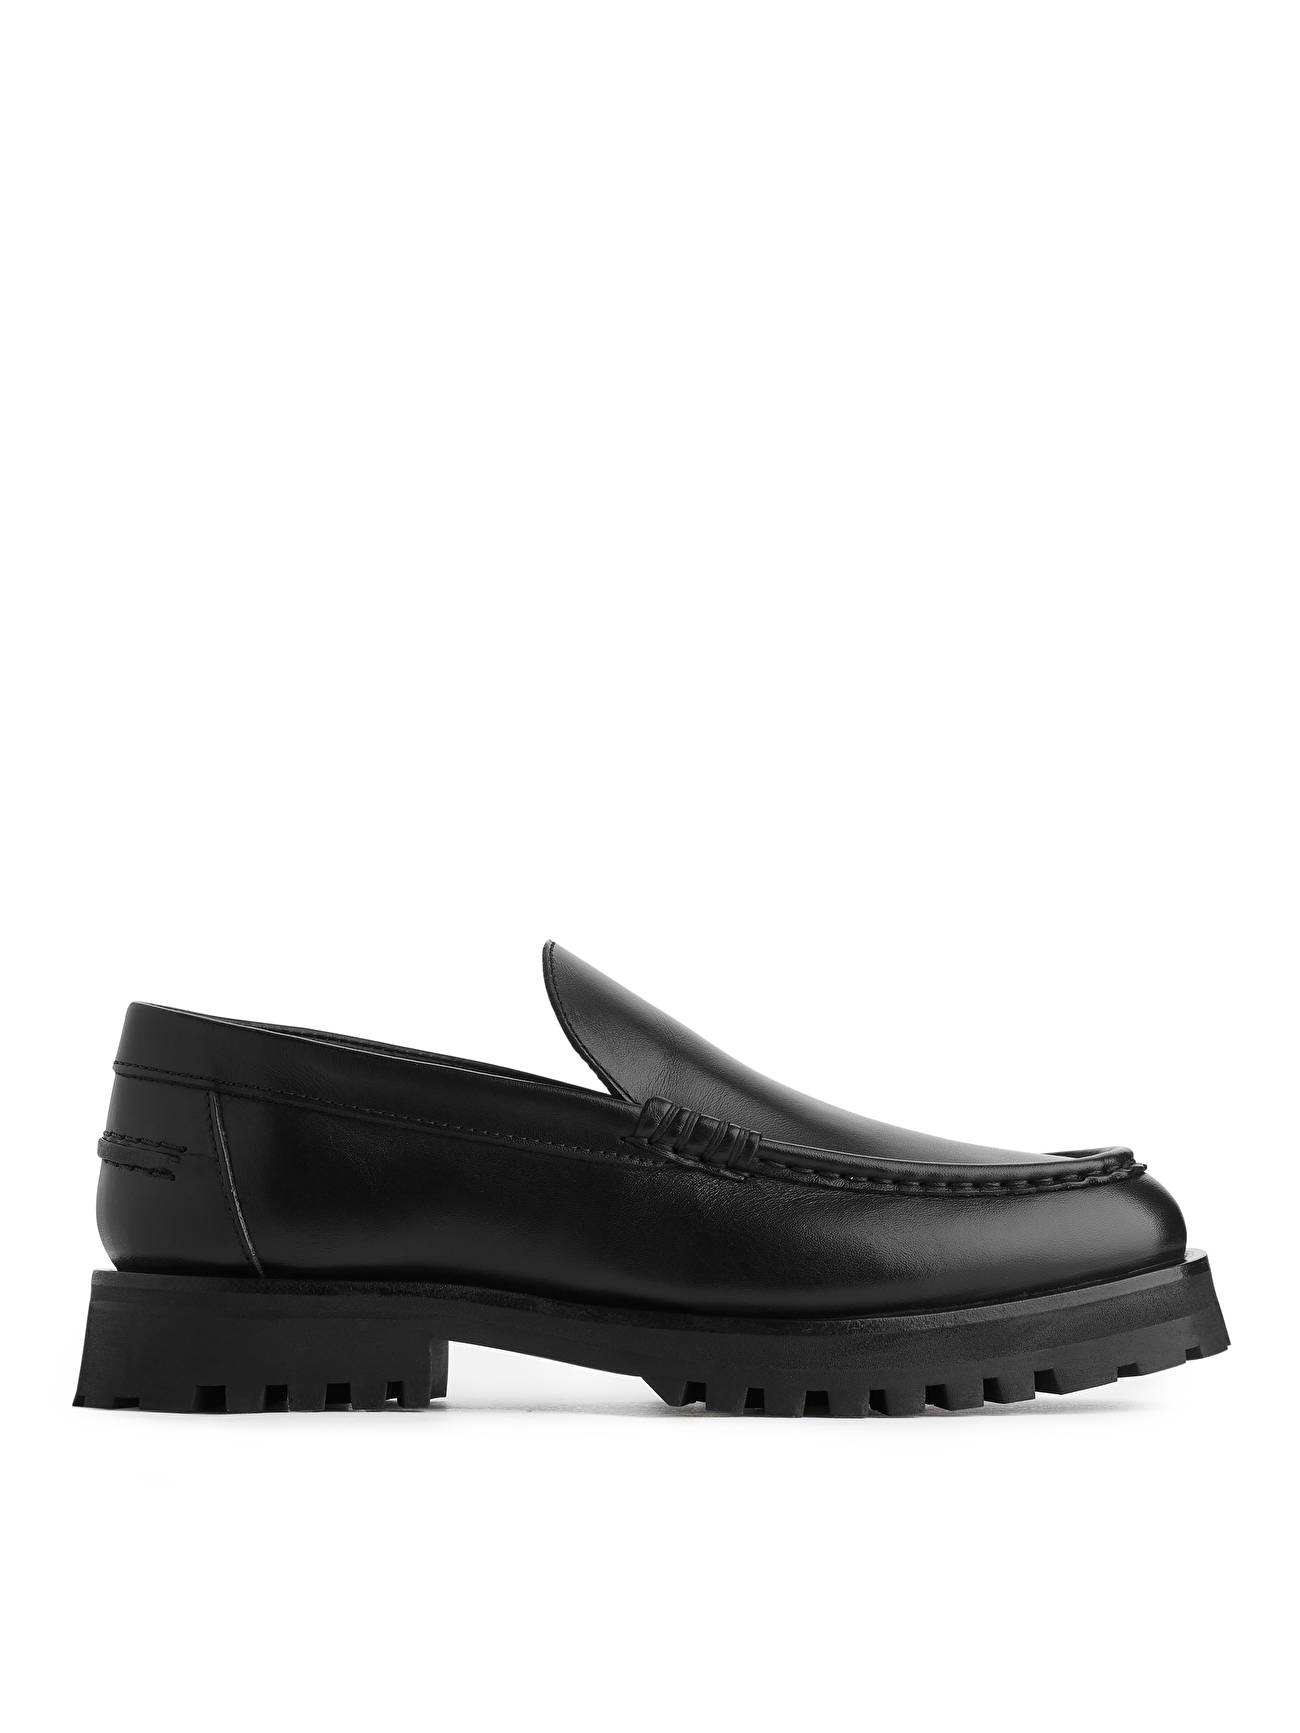 Arket Chunky Leather Moccasins